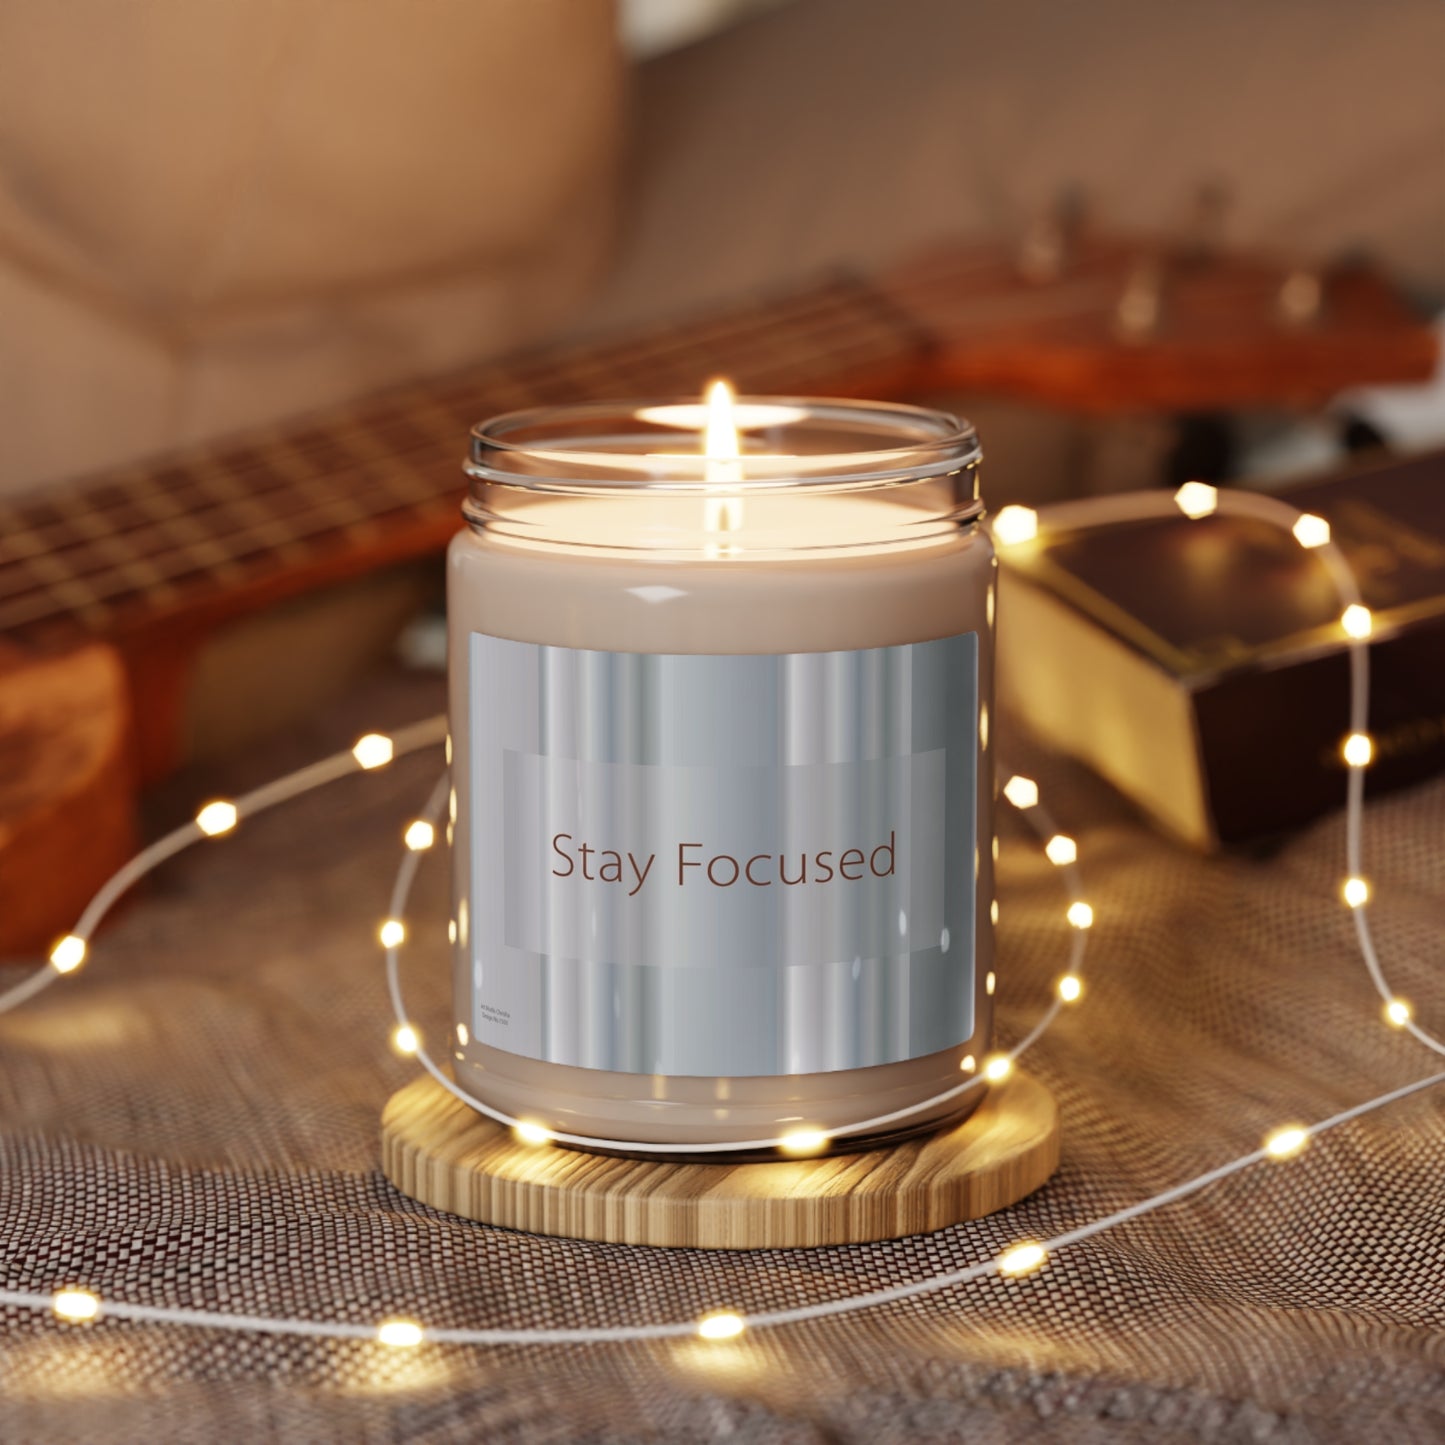 Scented Soy Candle, 9oz Stay Focsued - Design No.1500